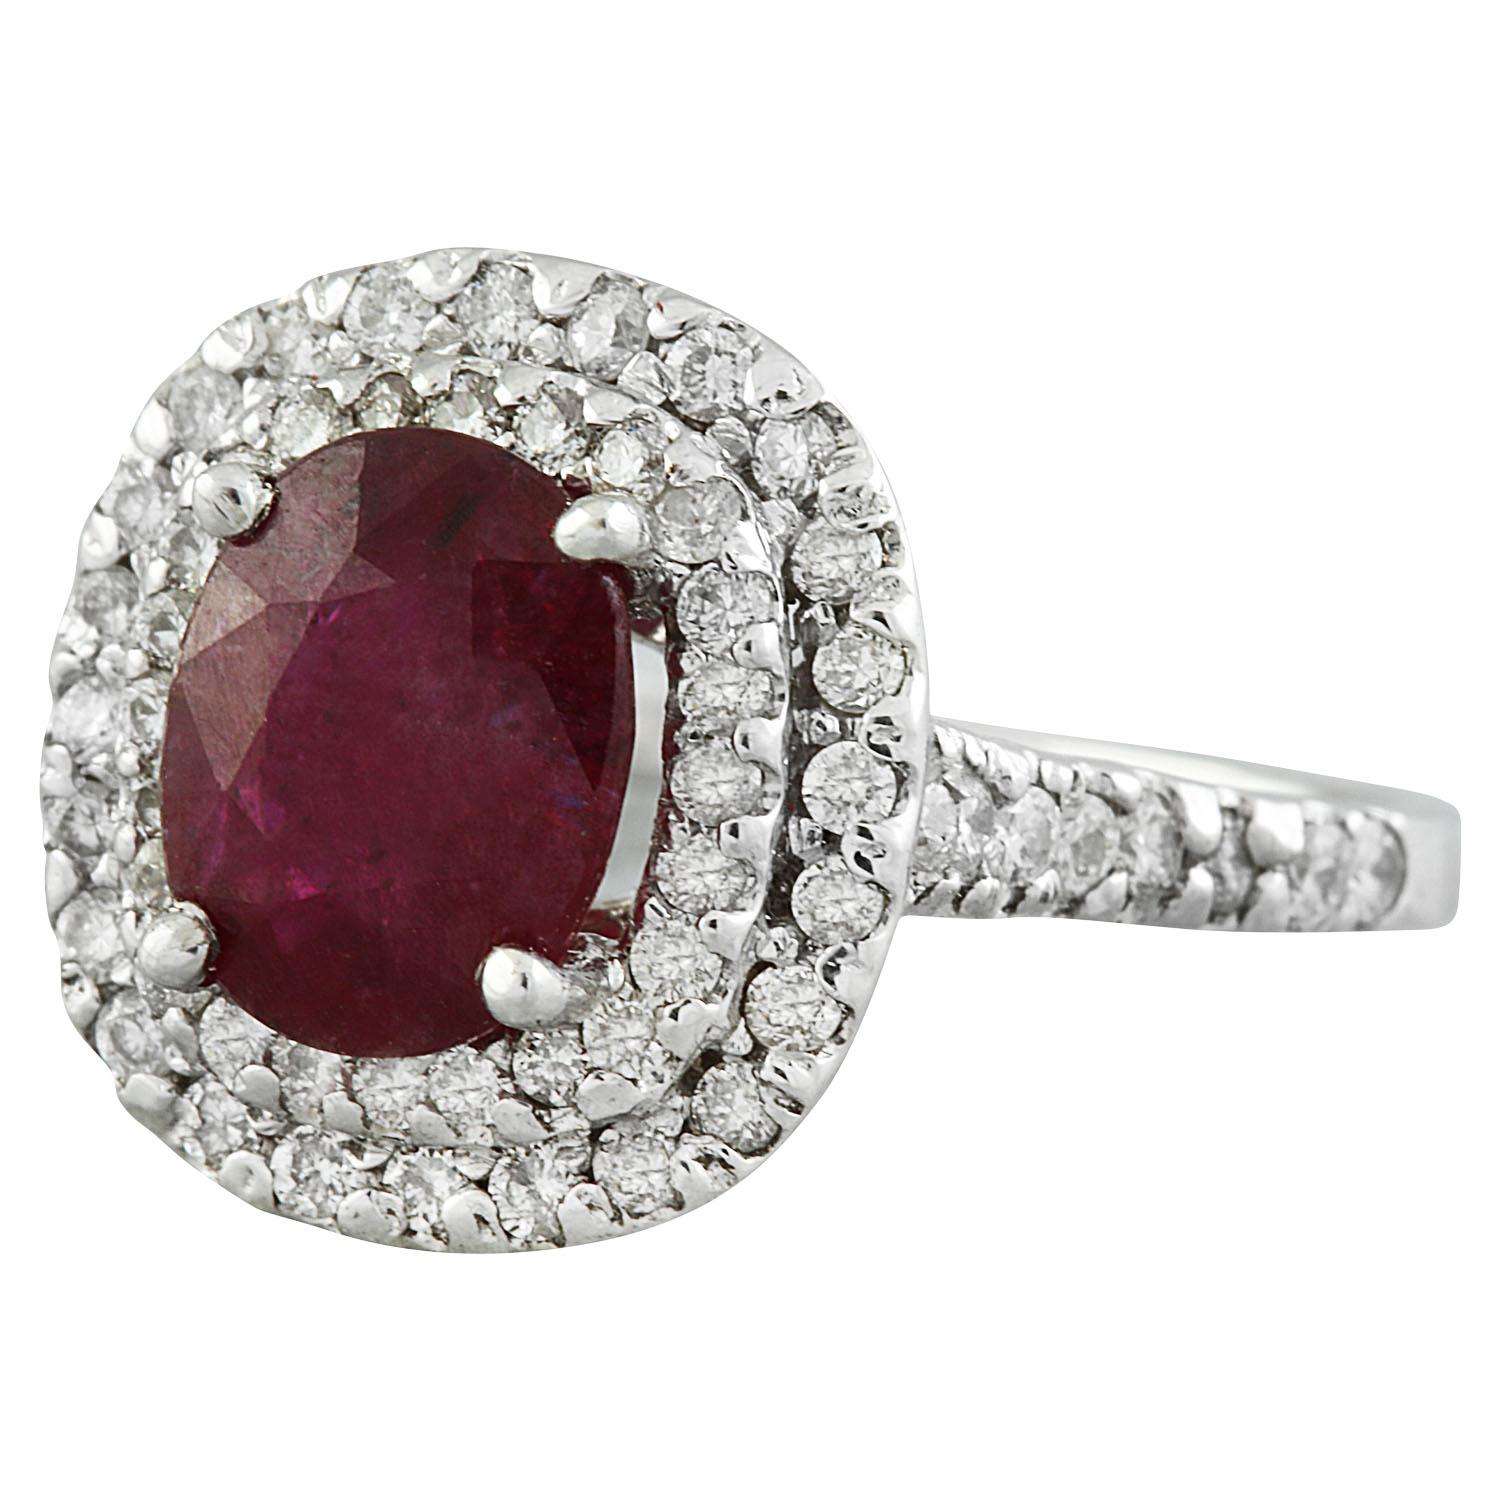 3.88 Carat Natural Ruby 14 Karat Solid White Gold Diamond Ring
Stamped: 14K 
Total Ring Weight: 4.6 Grams 
Ruby Weight 2.78 Carat (9.00x7.00 Millimeters)
Diamond Weight: 1.10 carat (F-G Color, VS2-SI1 Clarity )
Quantity: 64
Face Measures: